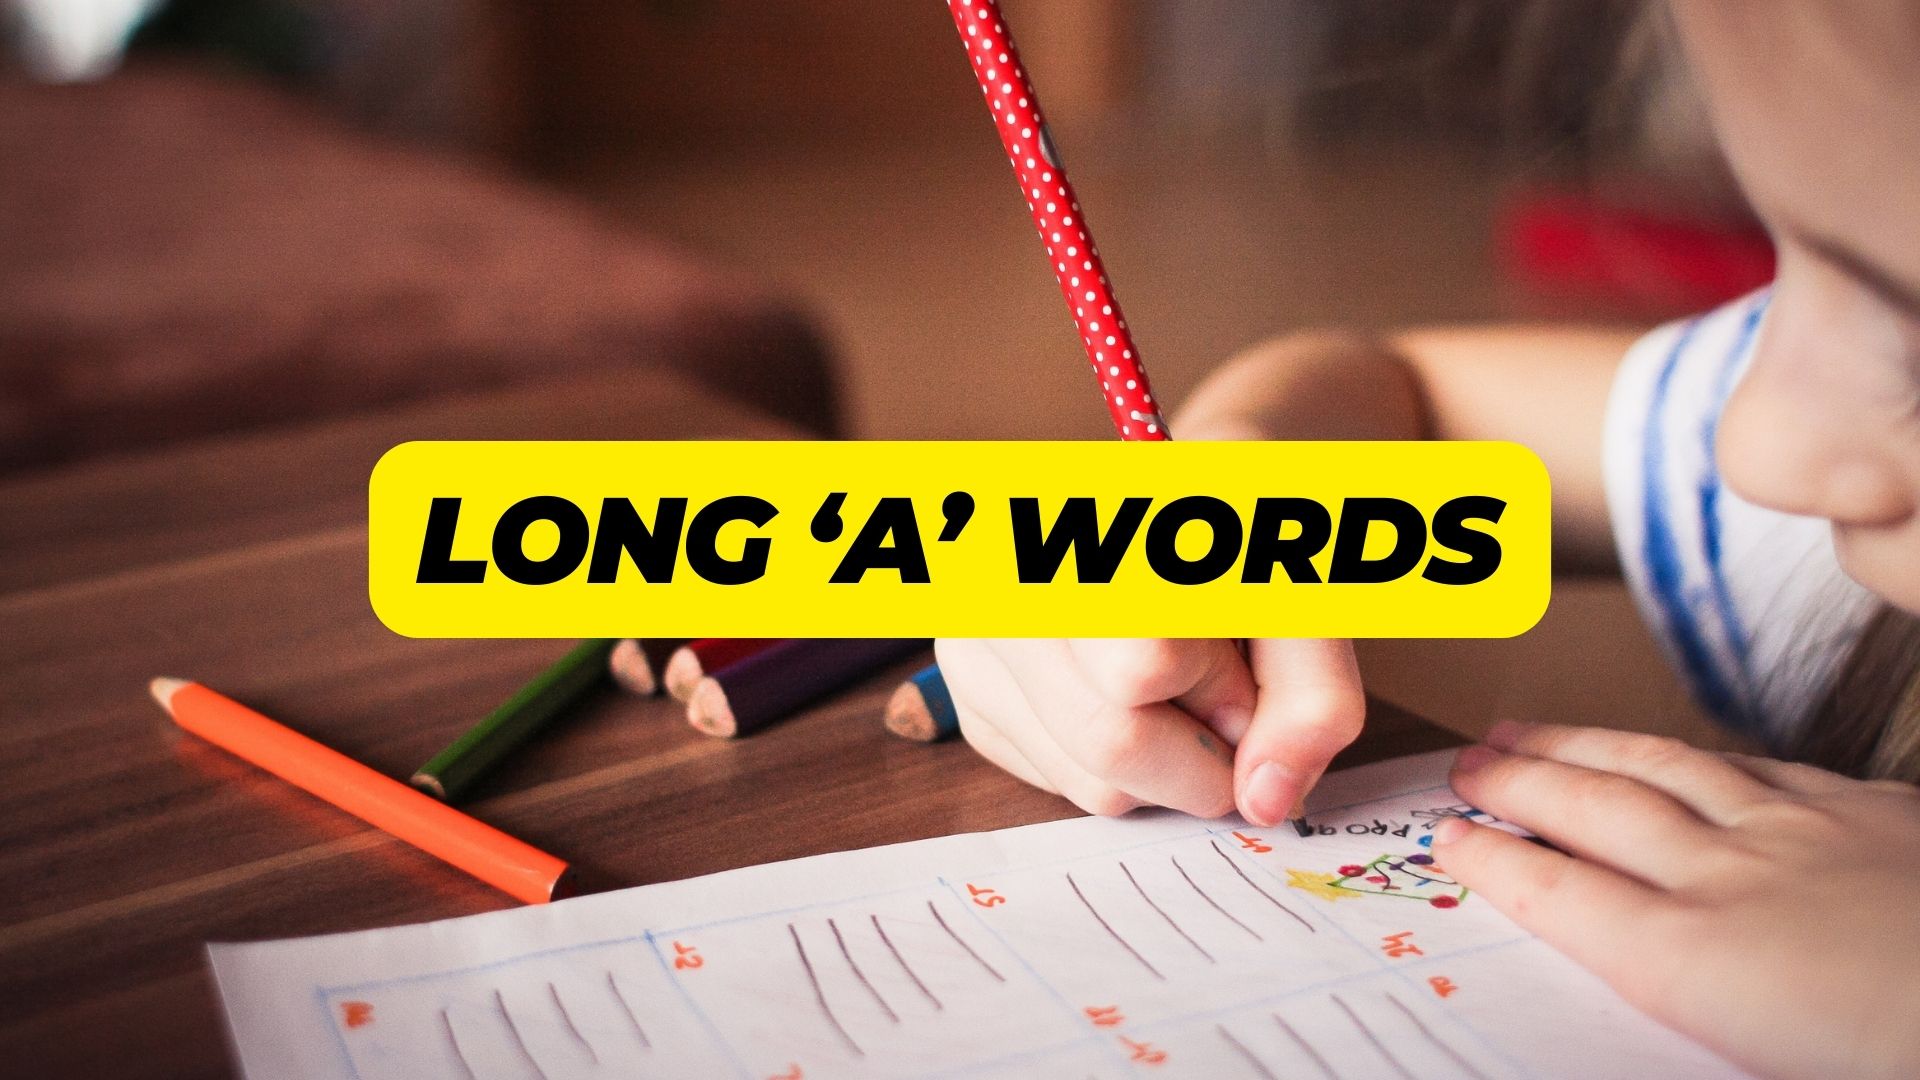 Long 'A' Words to Enhance your Vocabulary